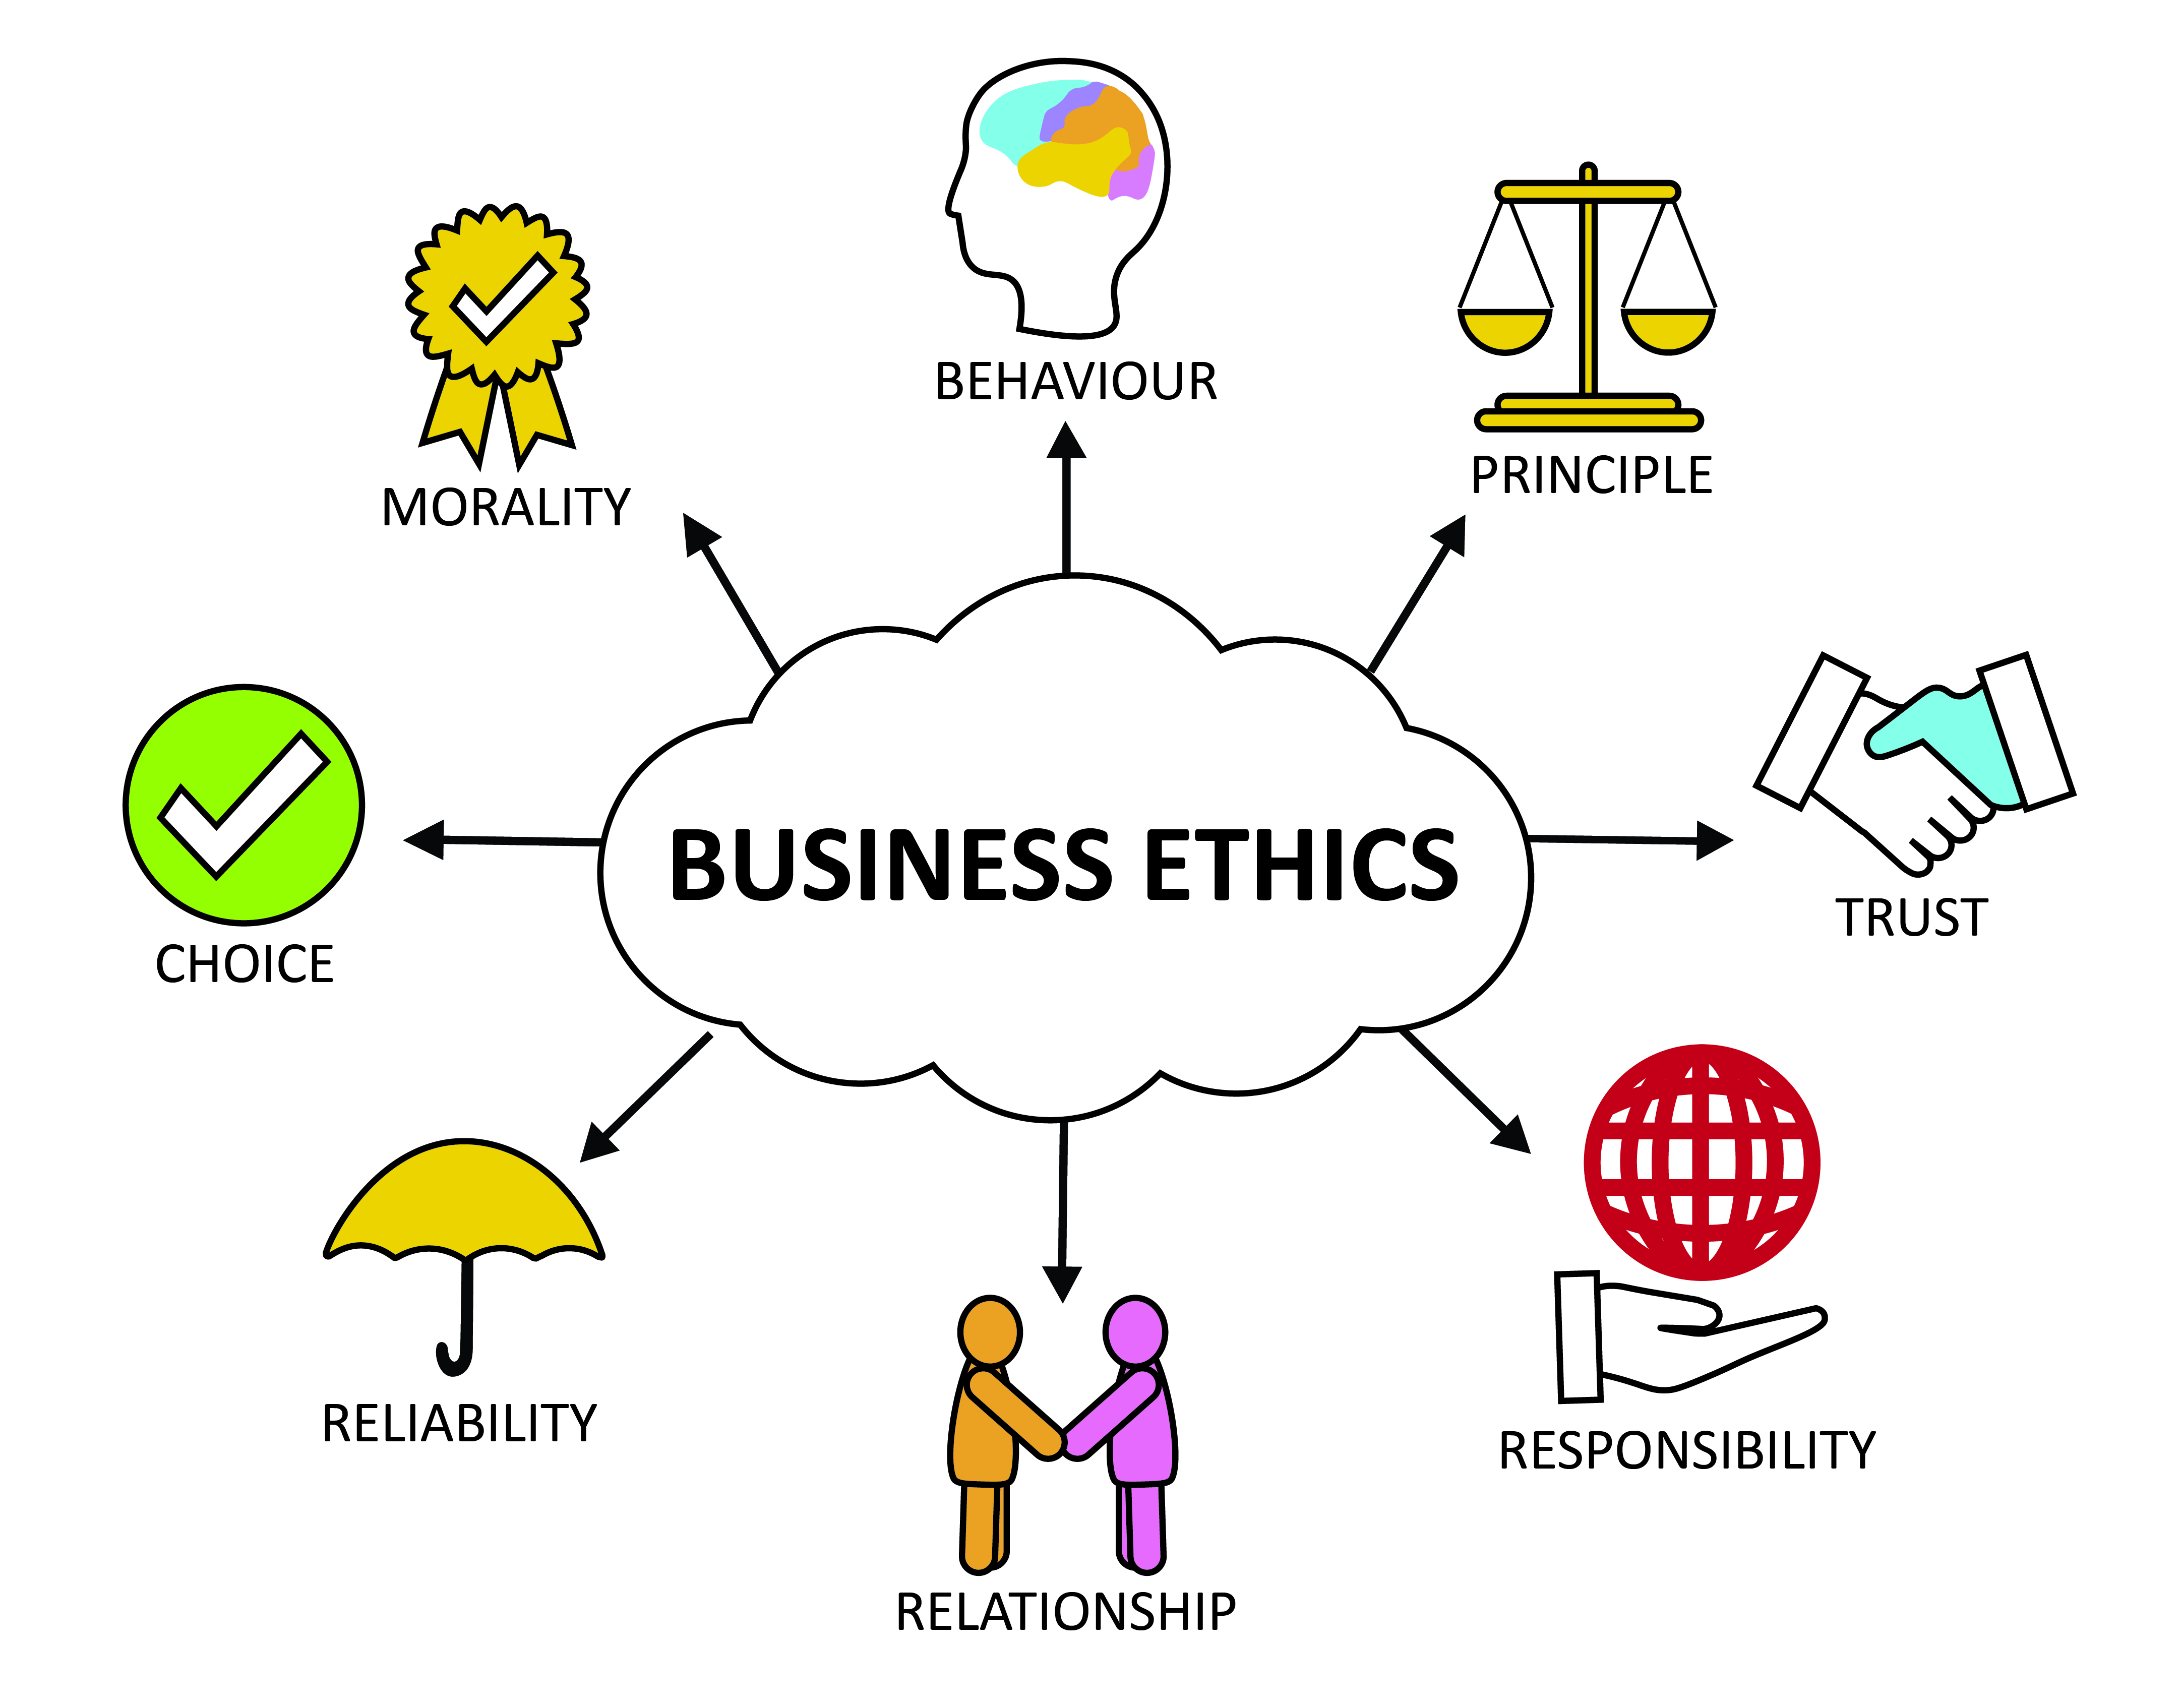 business ethics and social responsibility assignment